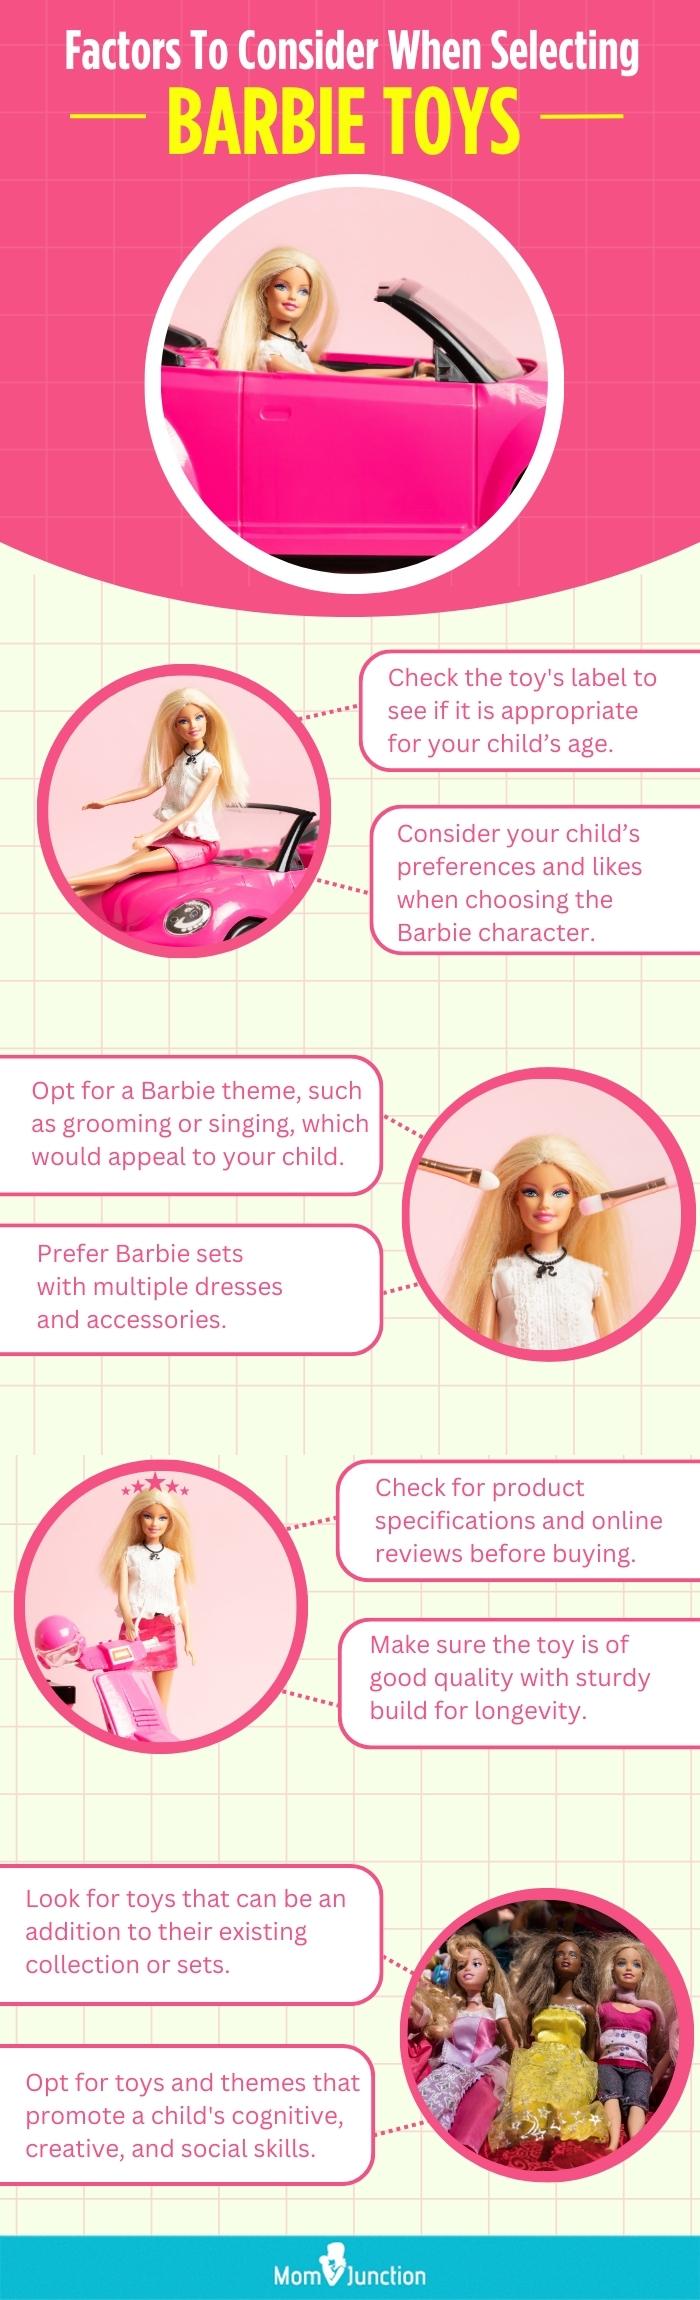 Factors To Consider When Selecting Barbie Toys (infographic)